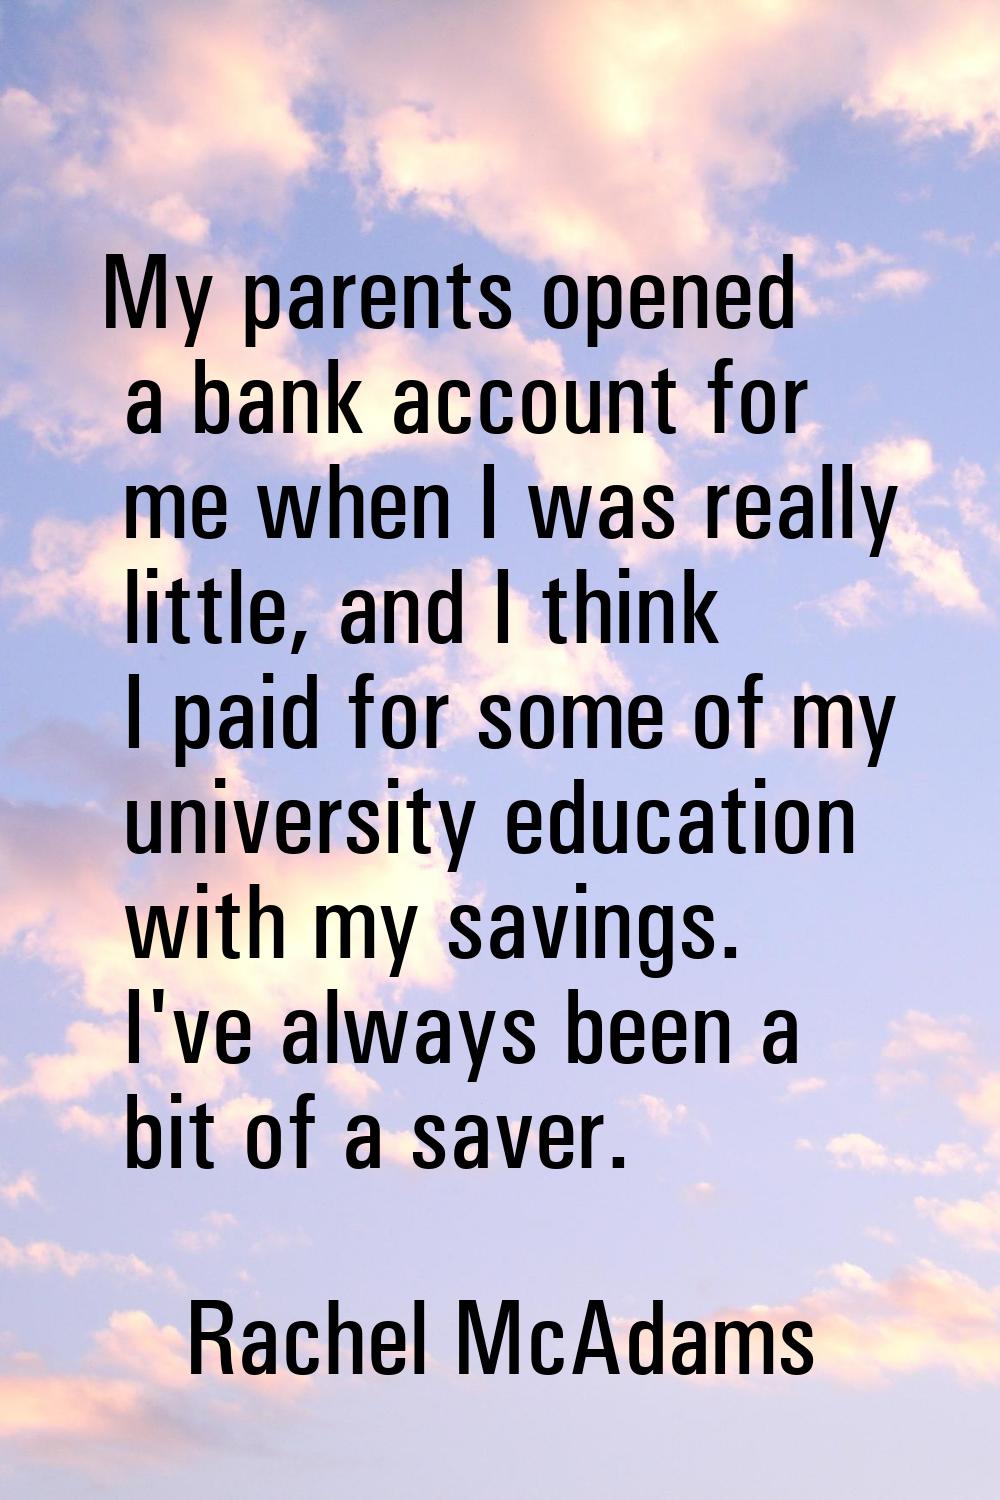 My parents opened a bank account for me when I was really little, and I think I paid for some of my